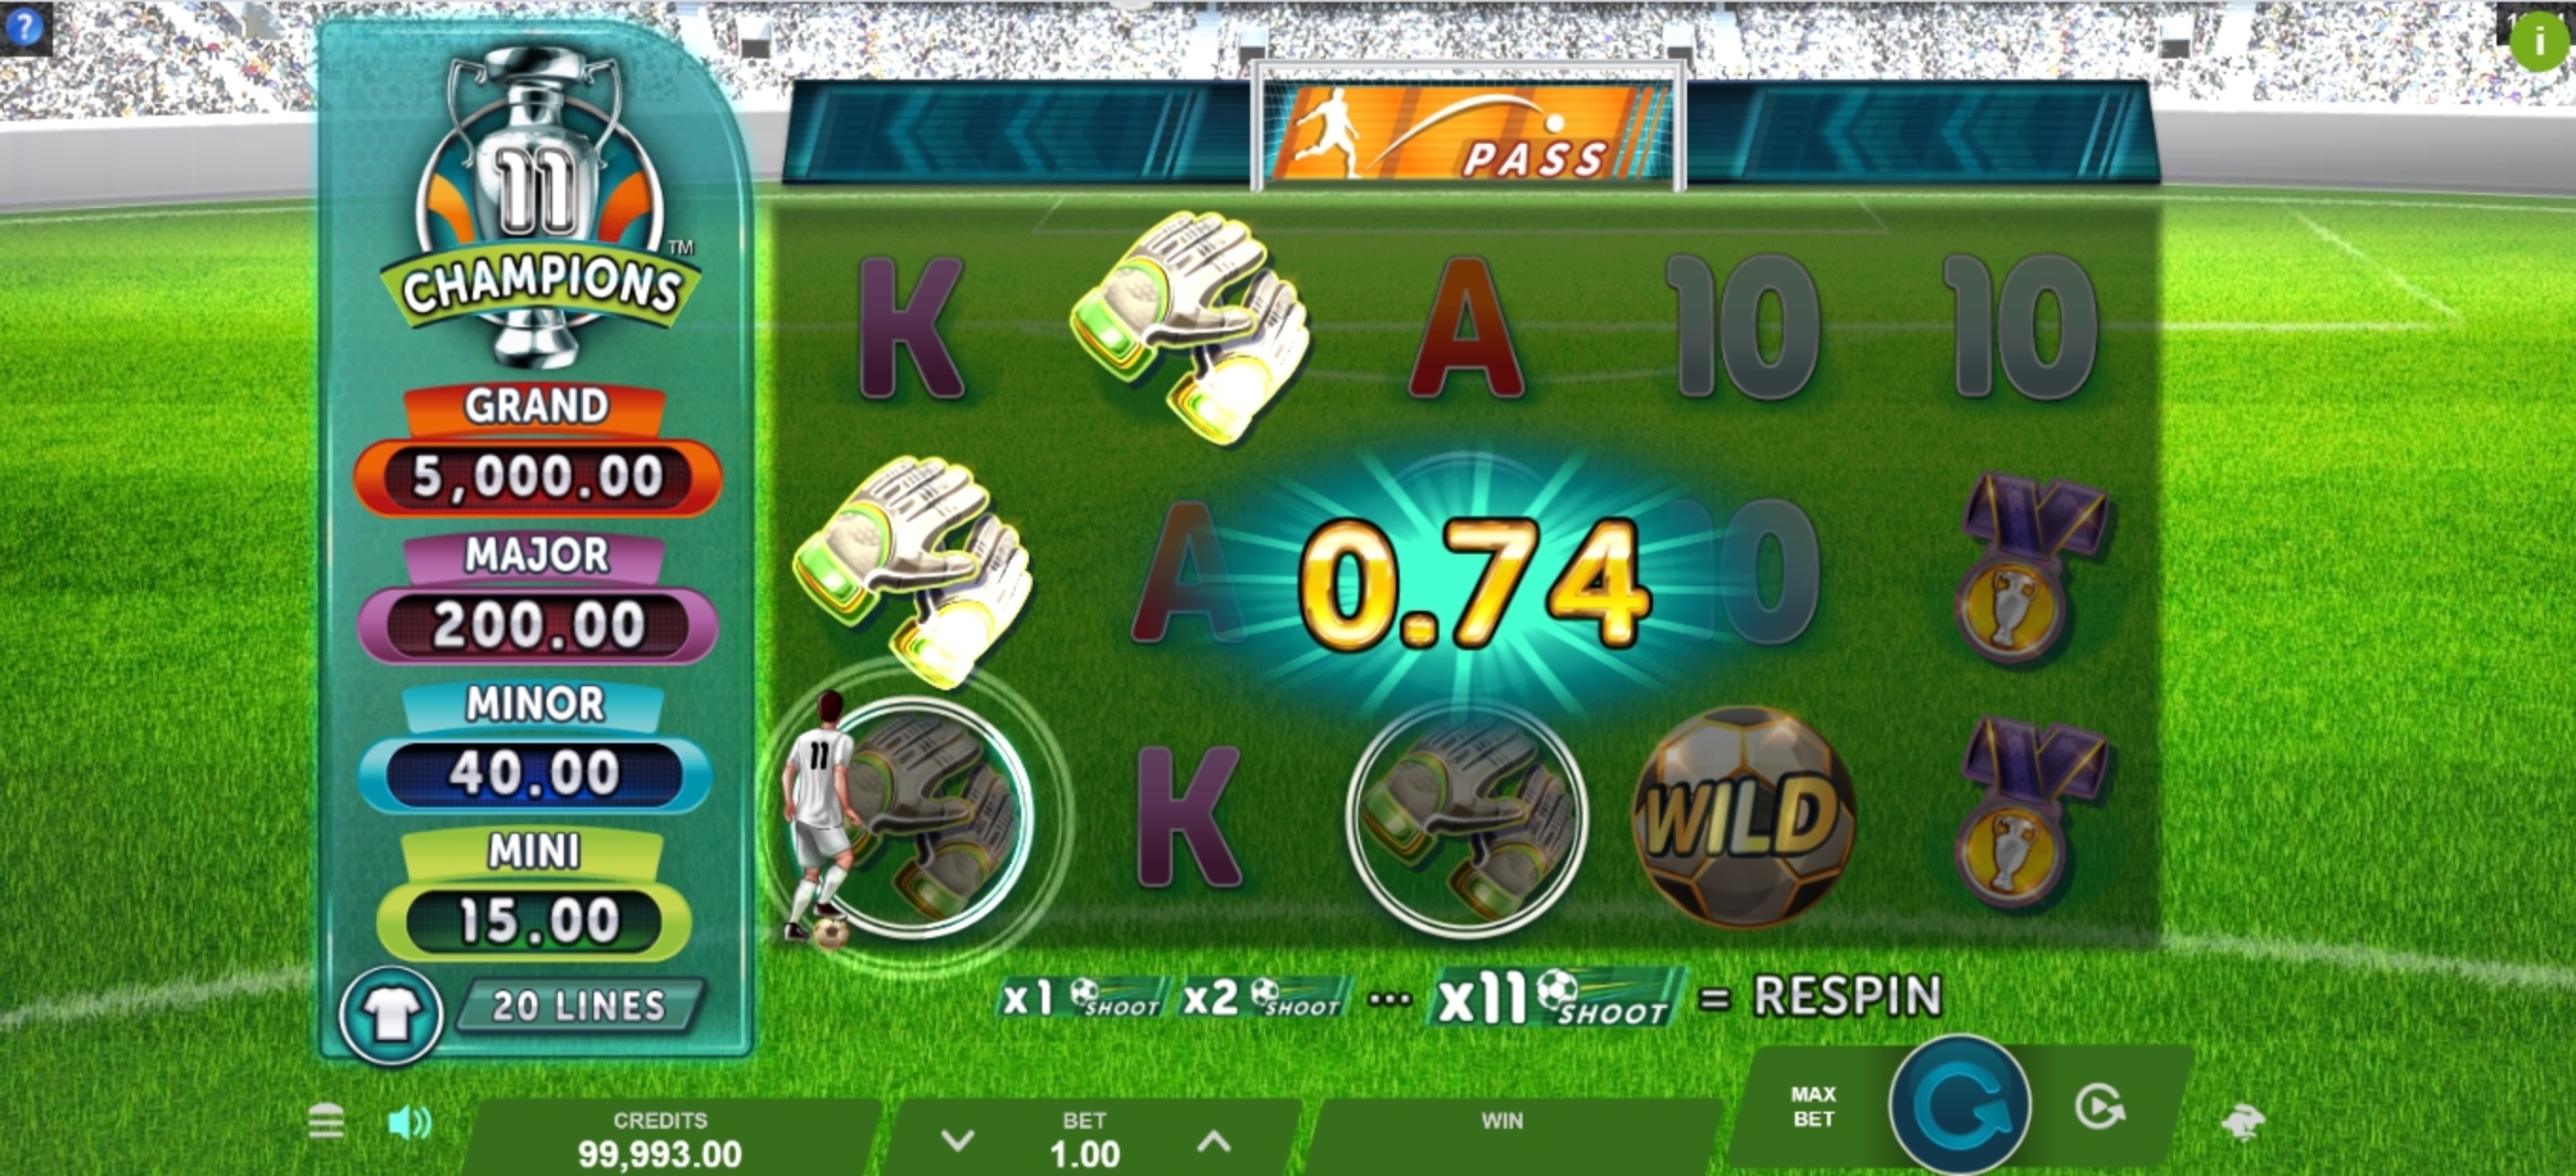 Win Money in 11 Champions Free Slot Game by Gameburger Studios